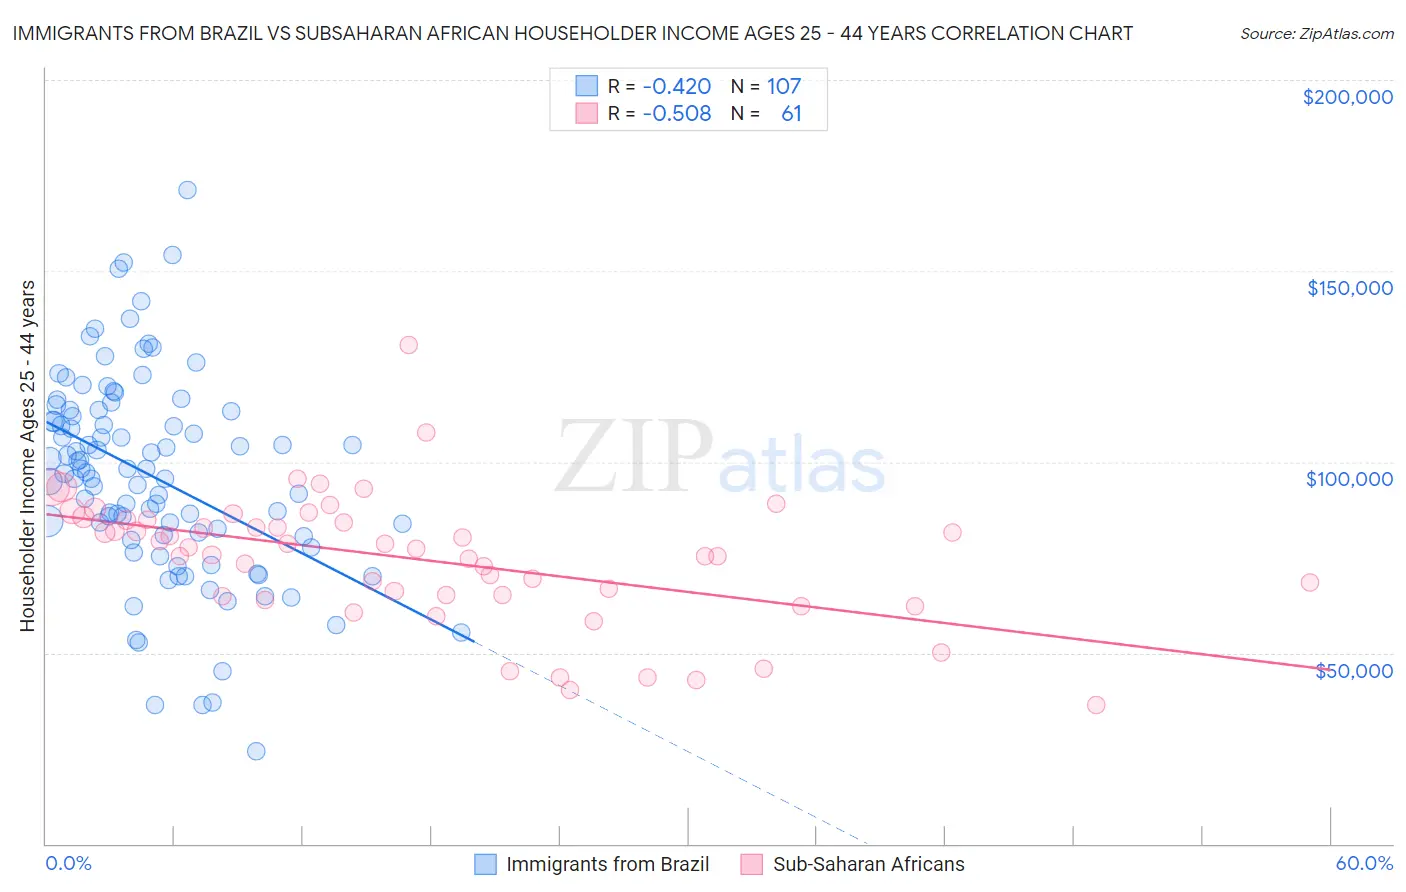 Immigrants from Brazil vs Subsaharan African Householder Income Ages 25 - 44 years